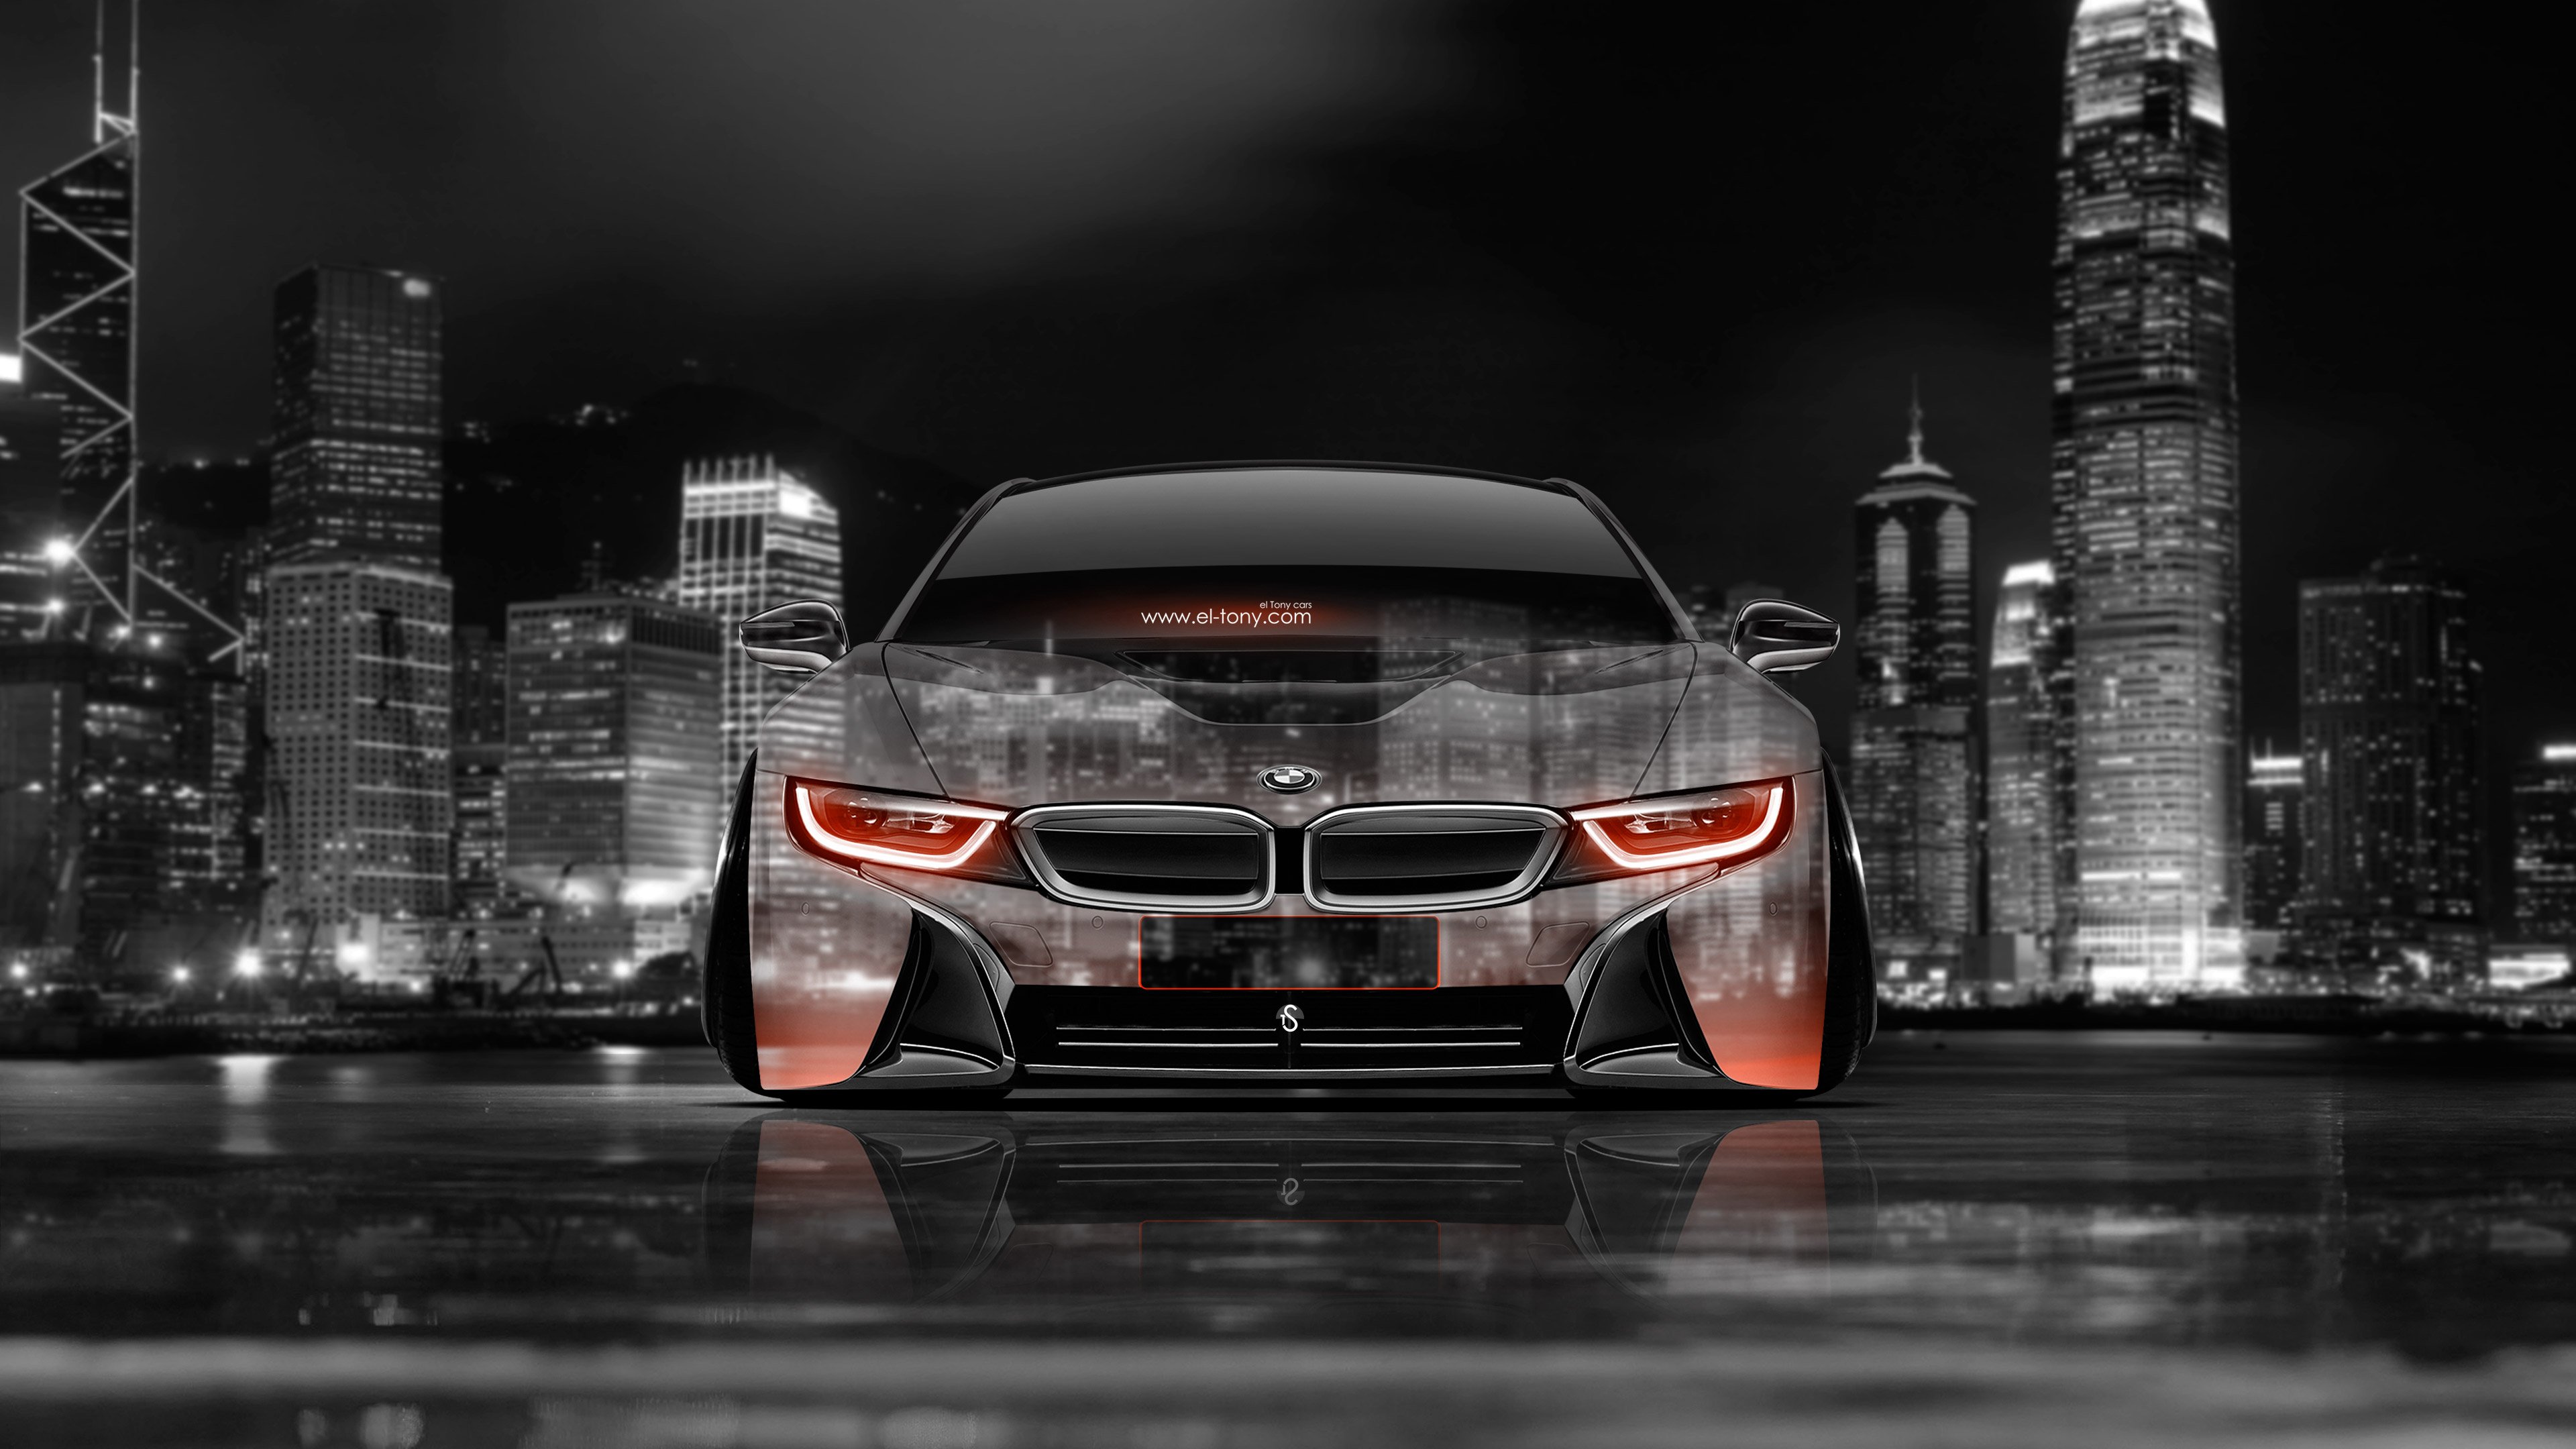 BMW i8 Front Crystal City Car 2014 Orange Neon 4K Wallpapers design by